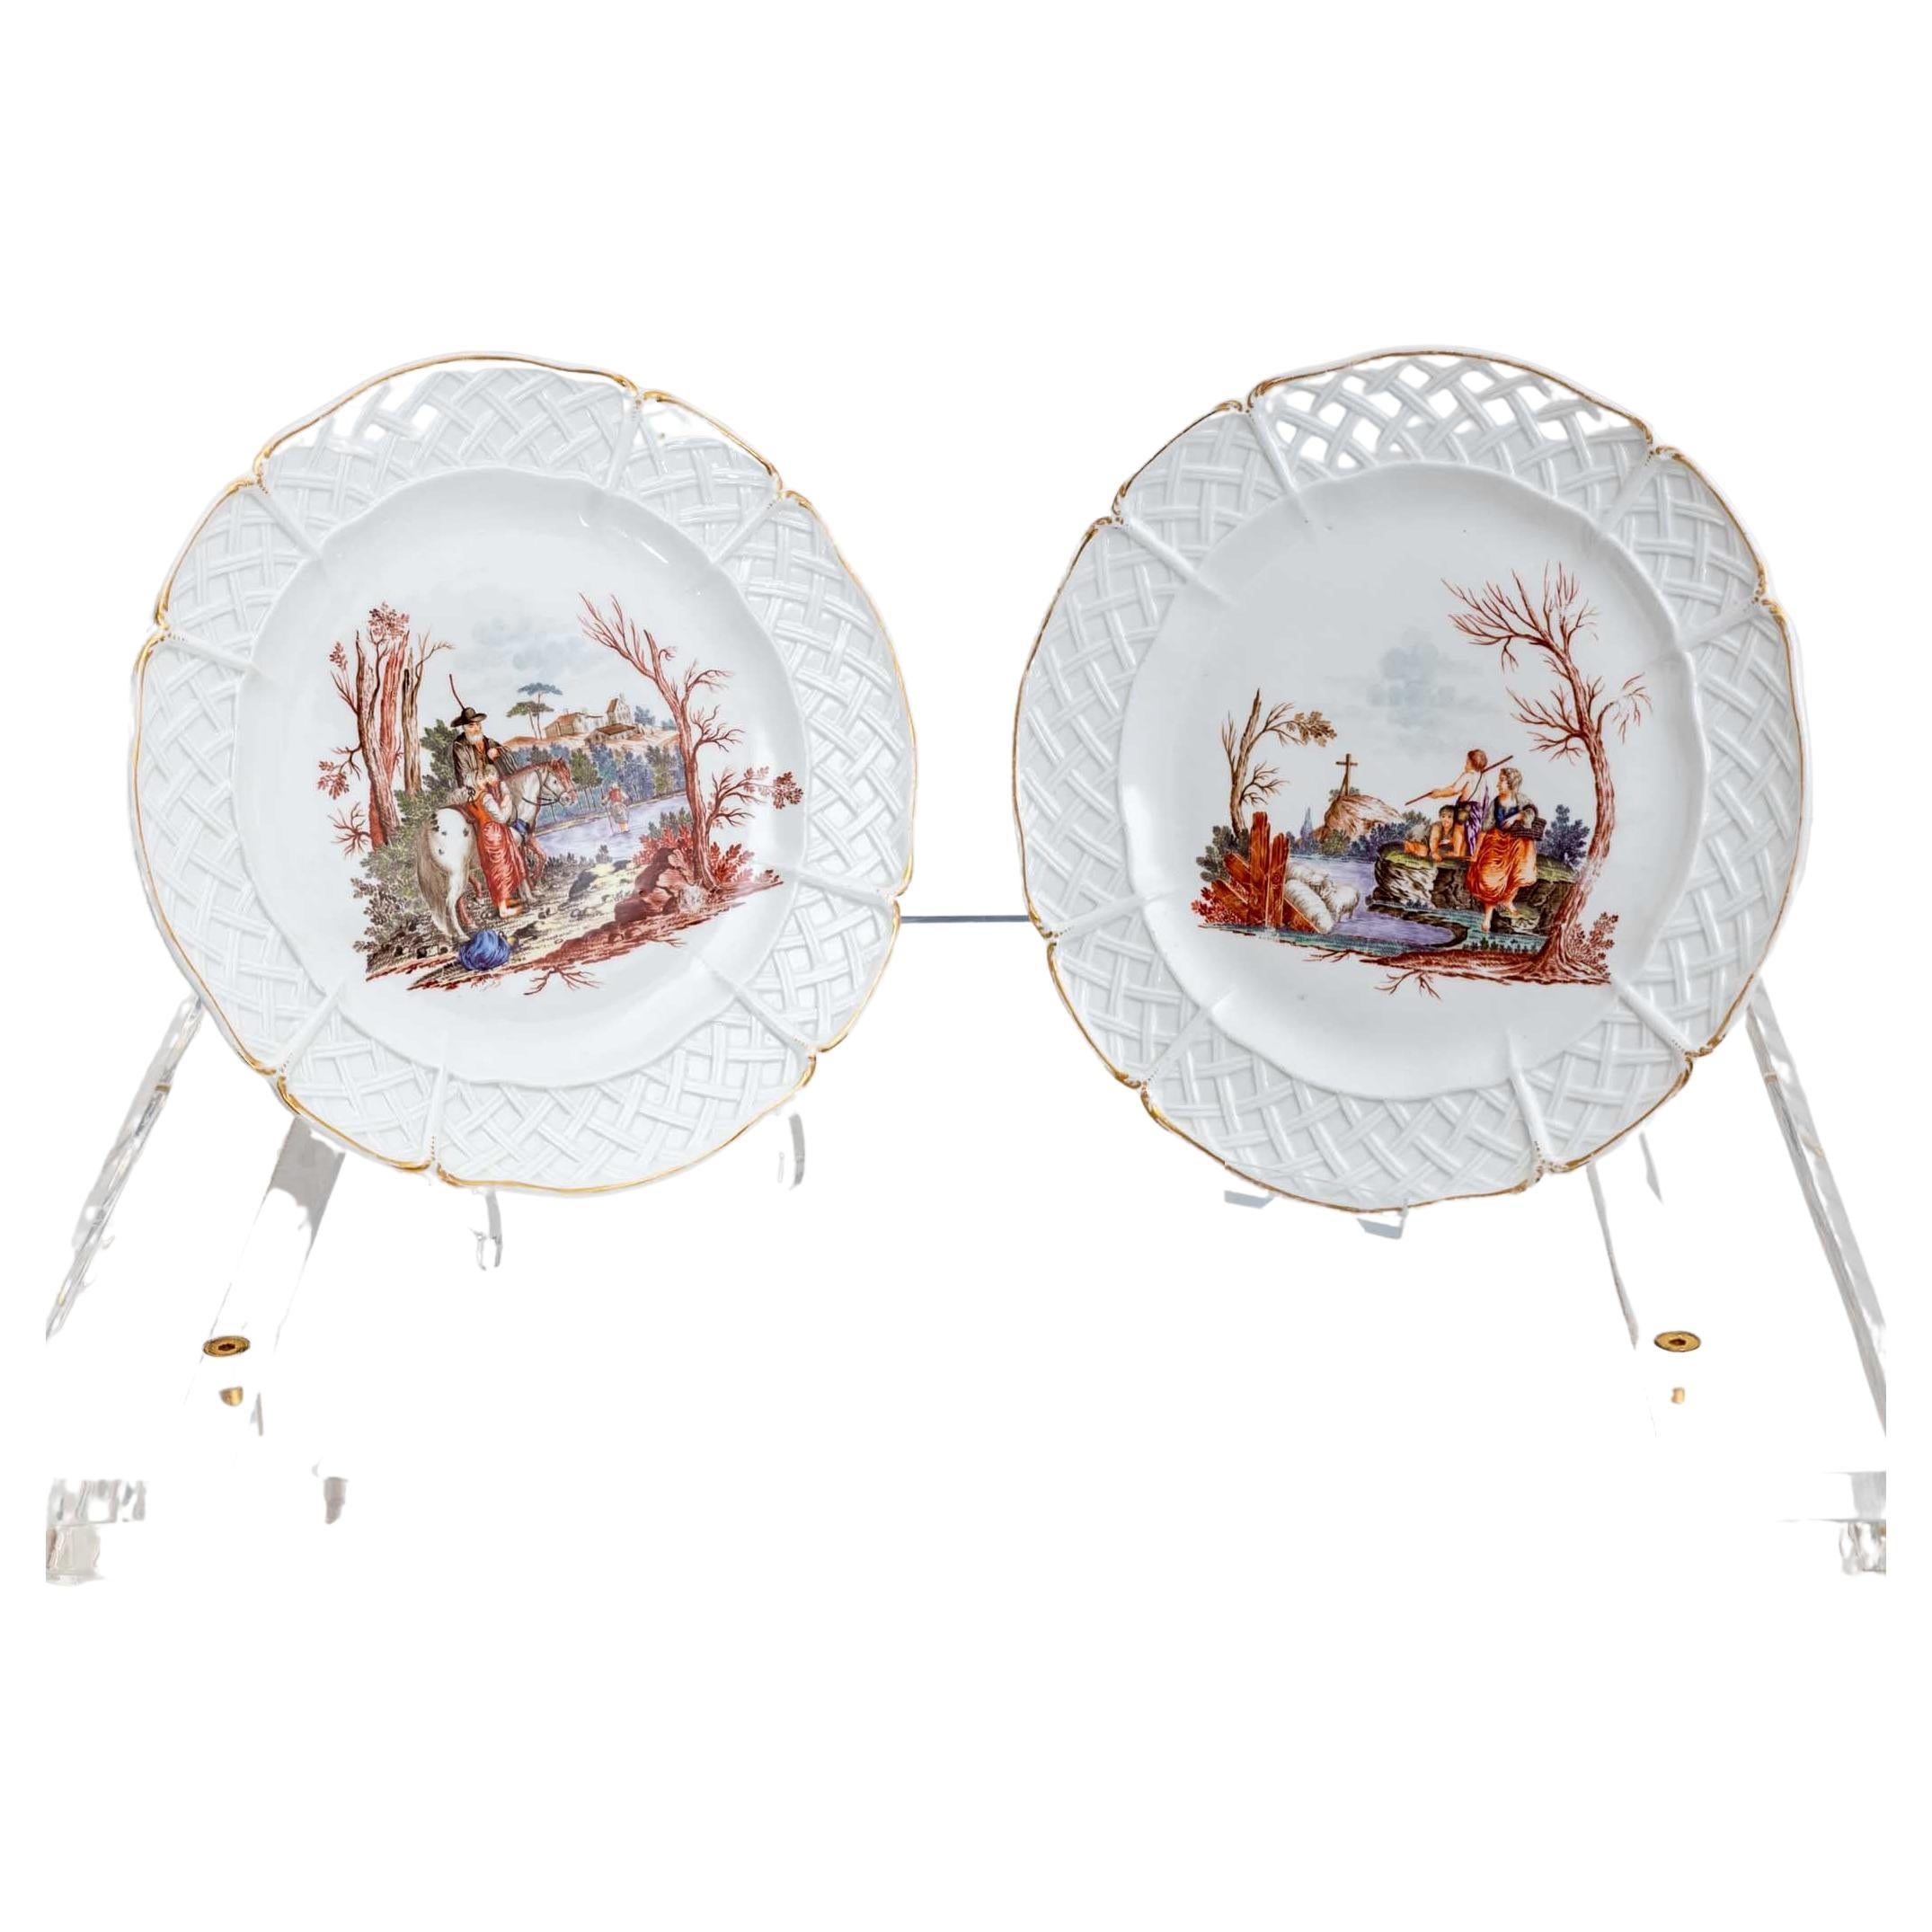 Two Porcelain Plates with Genre Scenes, Nymphenburg, circa 1770-1775 For Sale